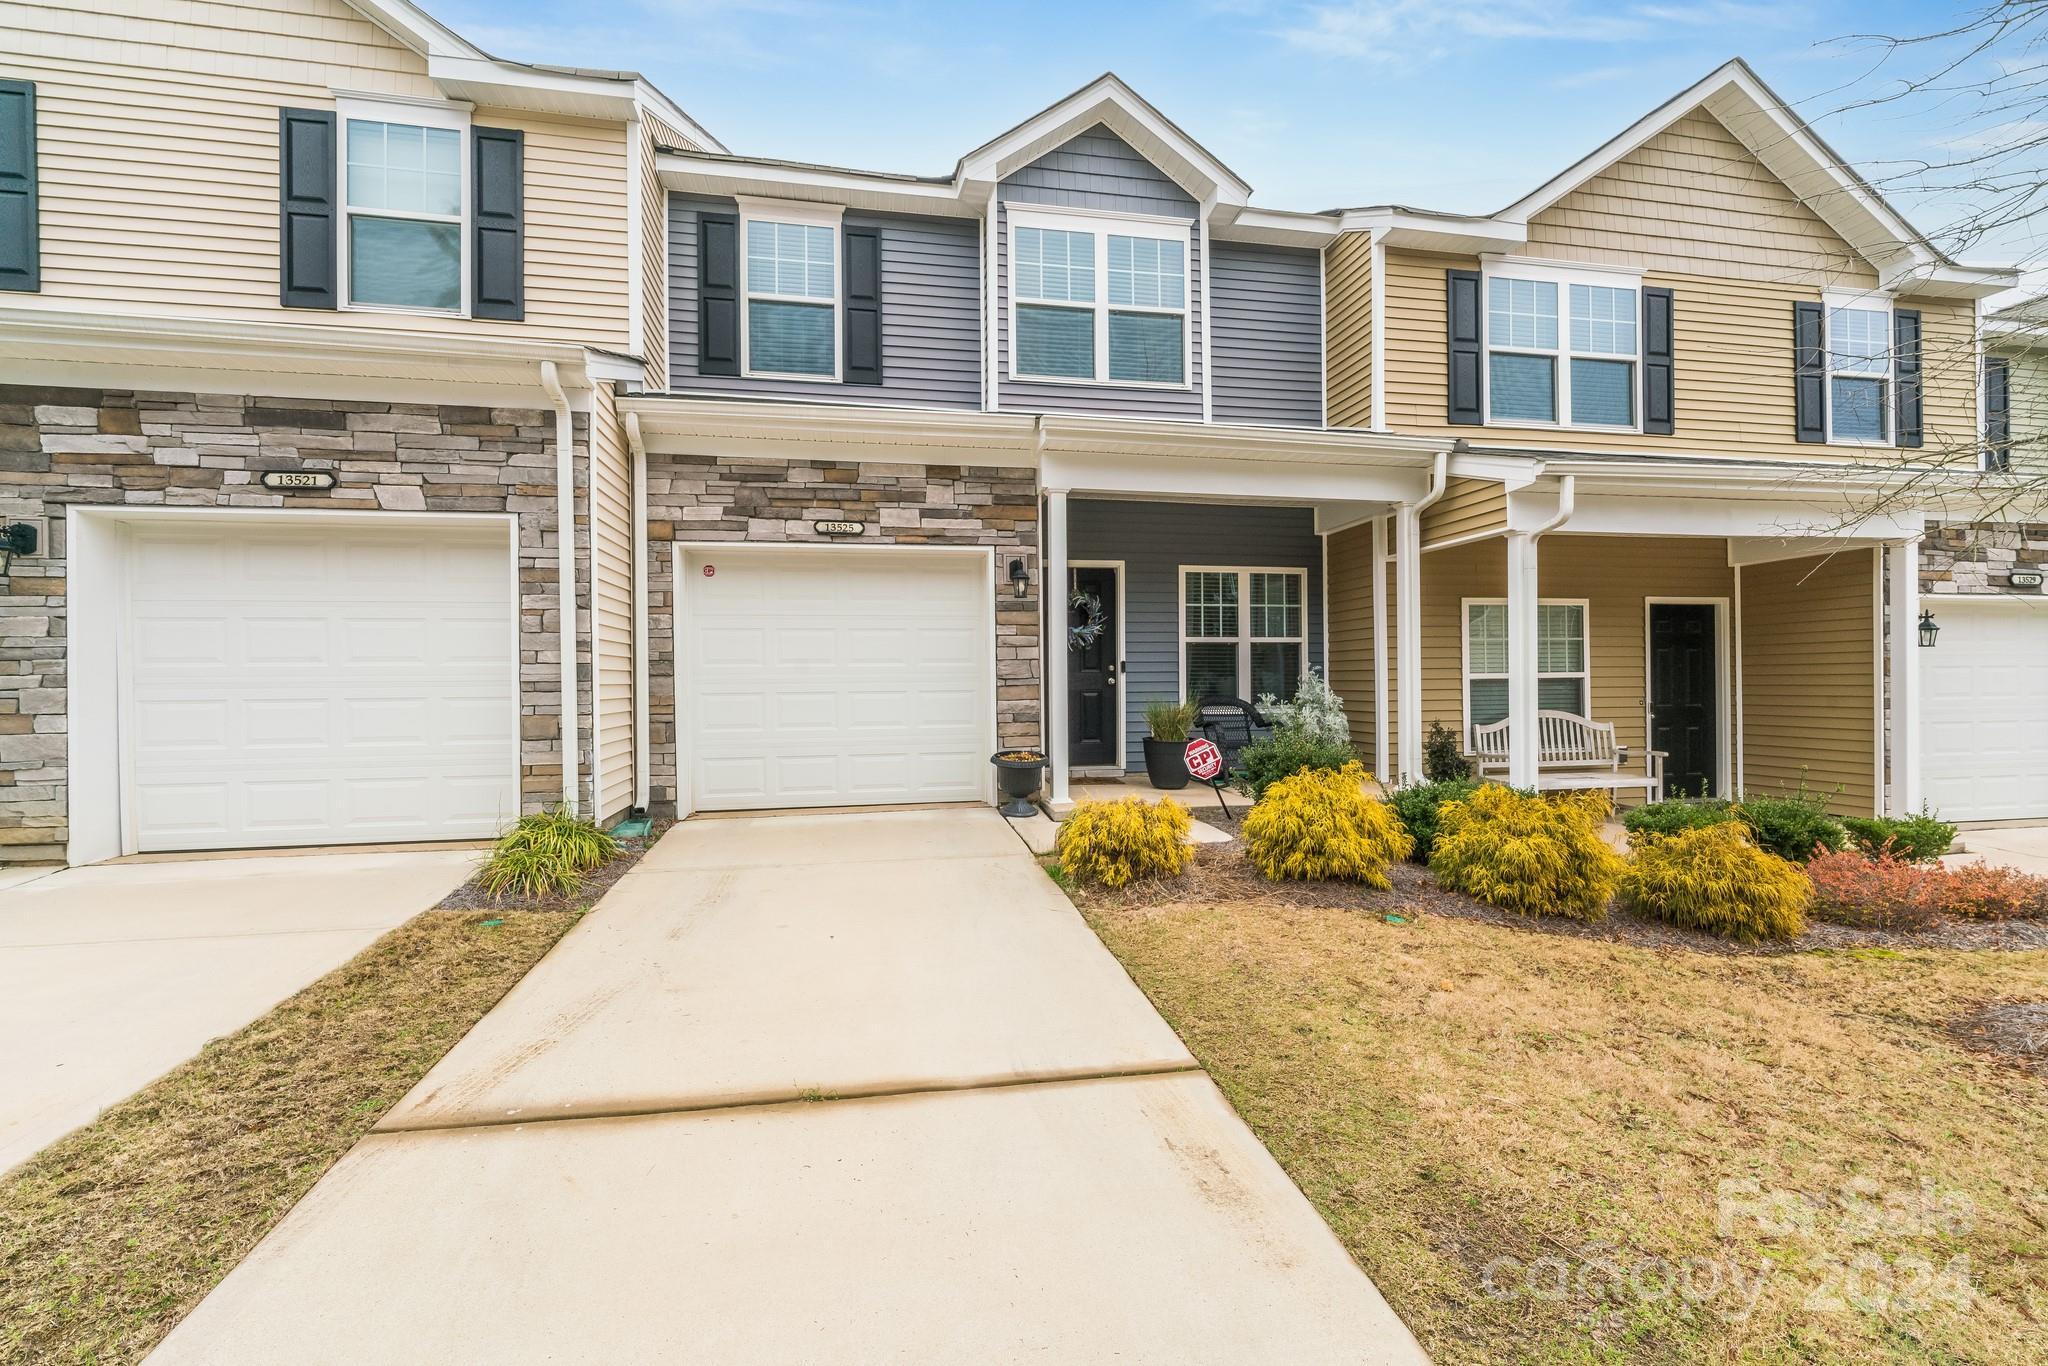 Photo one of 13525 Browhill Ln Charlotte NC 28278 | MLS 4112121